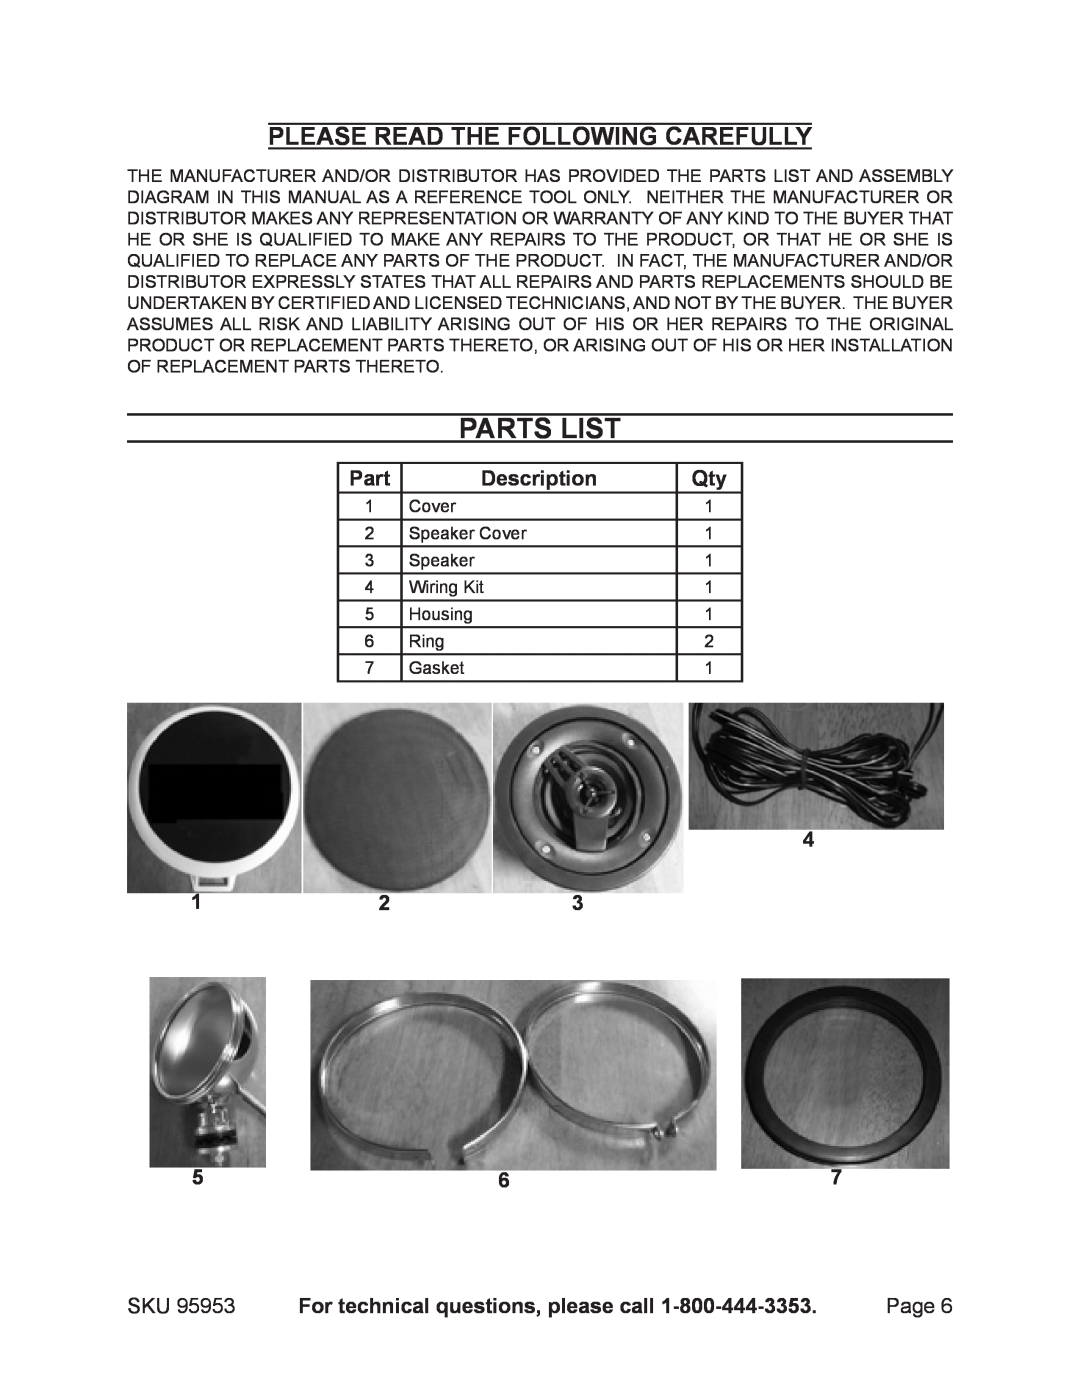 Harbor Freight Tools 95953 manual Parts List, Please Read The Following Carefully, Description, Page 